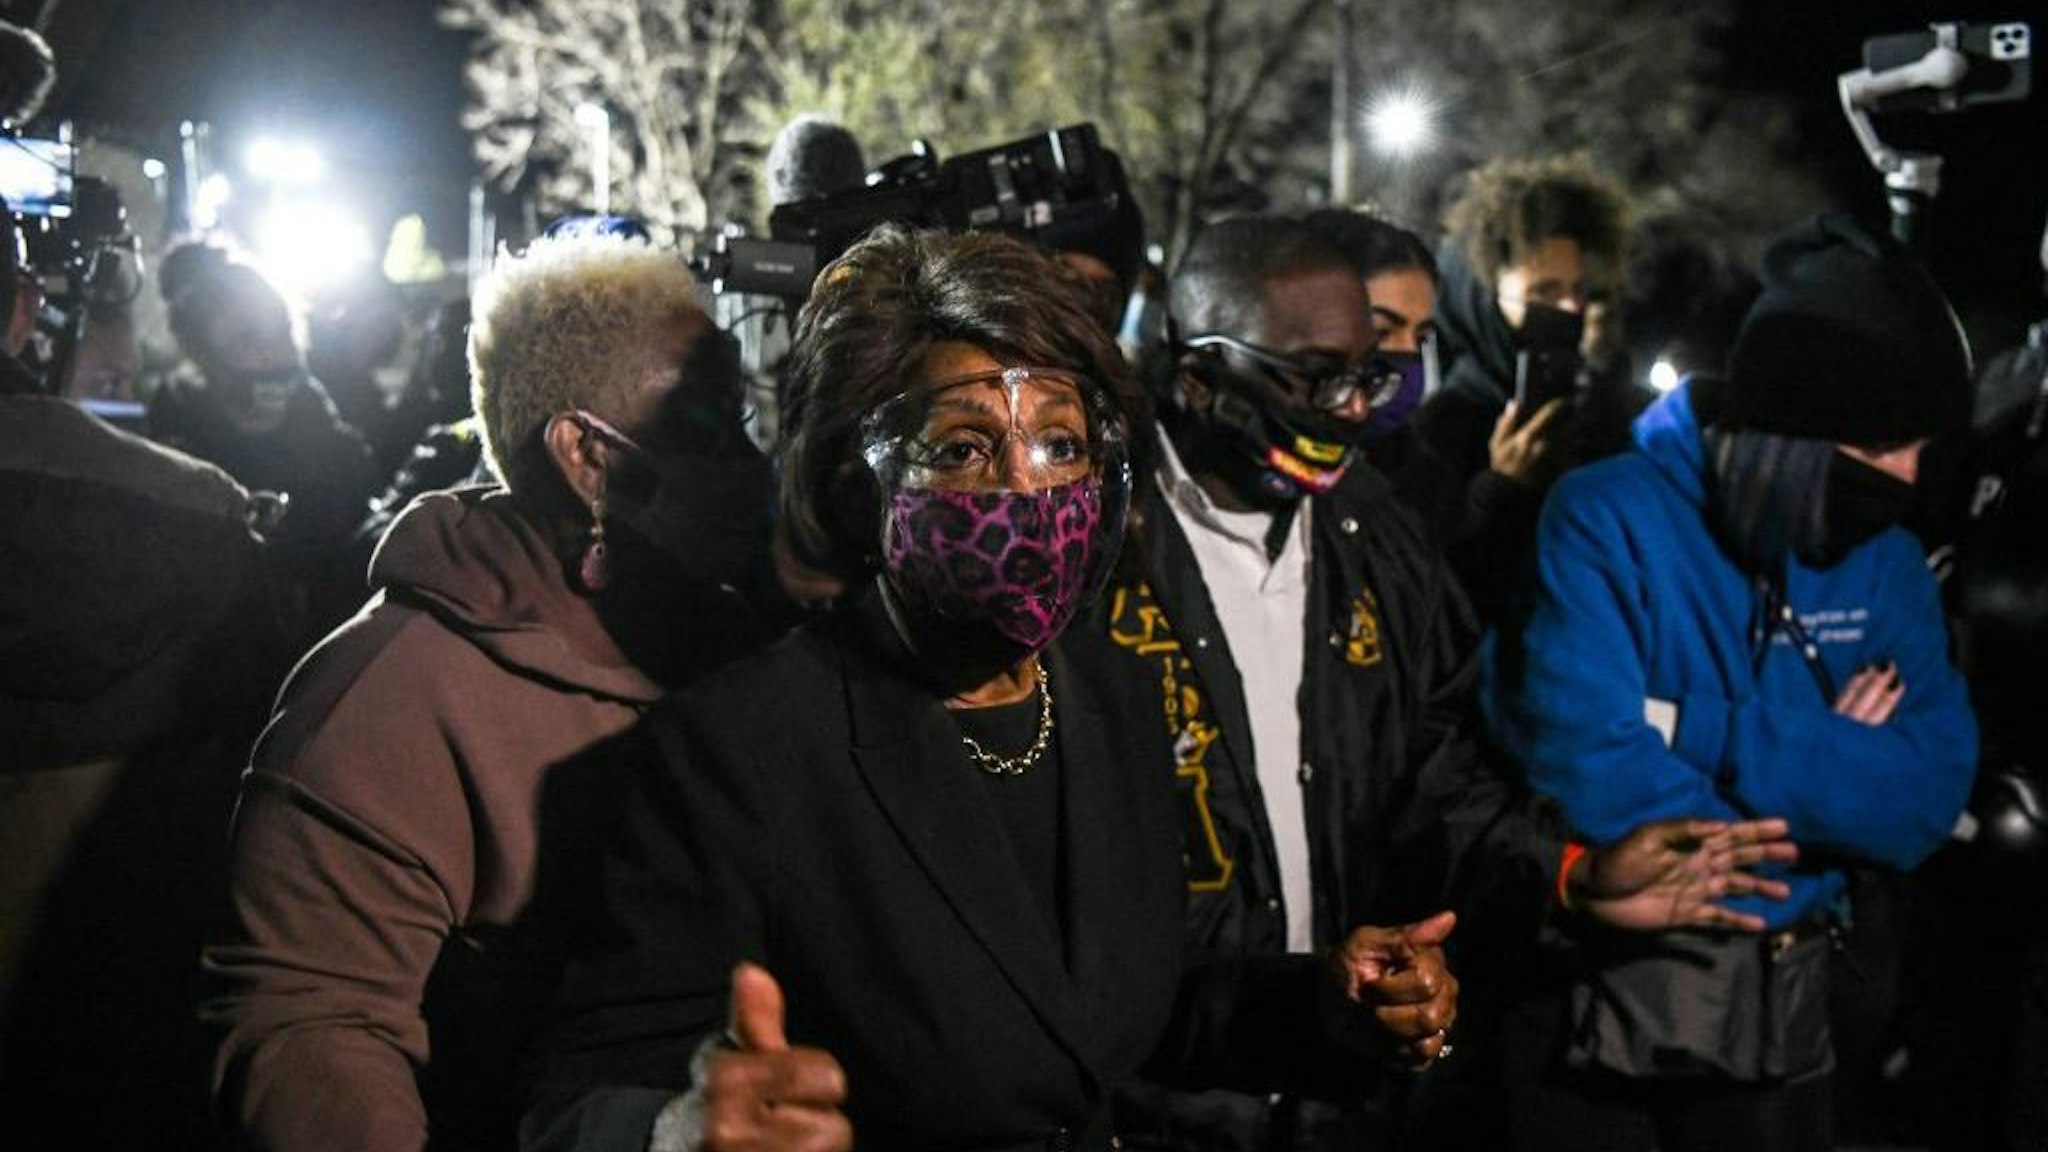 Representative Maxine Waters(C) (D-CA) speaks to the media during an ongoing protest at the Brooklyn Center Police Department in Brooklyn Centre, Minnesota on April 17, 2021. - Police officer, Kim Potter, who shot dead Black 20-year-old Daunte Wright in a Minneapolis suburb after appearing to mistake her gun for her Taser was arrested April 14 on manslaughter charges. (Photo by CHANDAN KHANNA / AFP) (Photo by CHANDAN KHANNA/AFP via Getty Images)